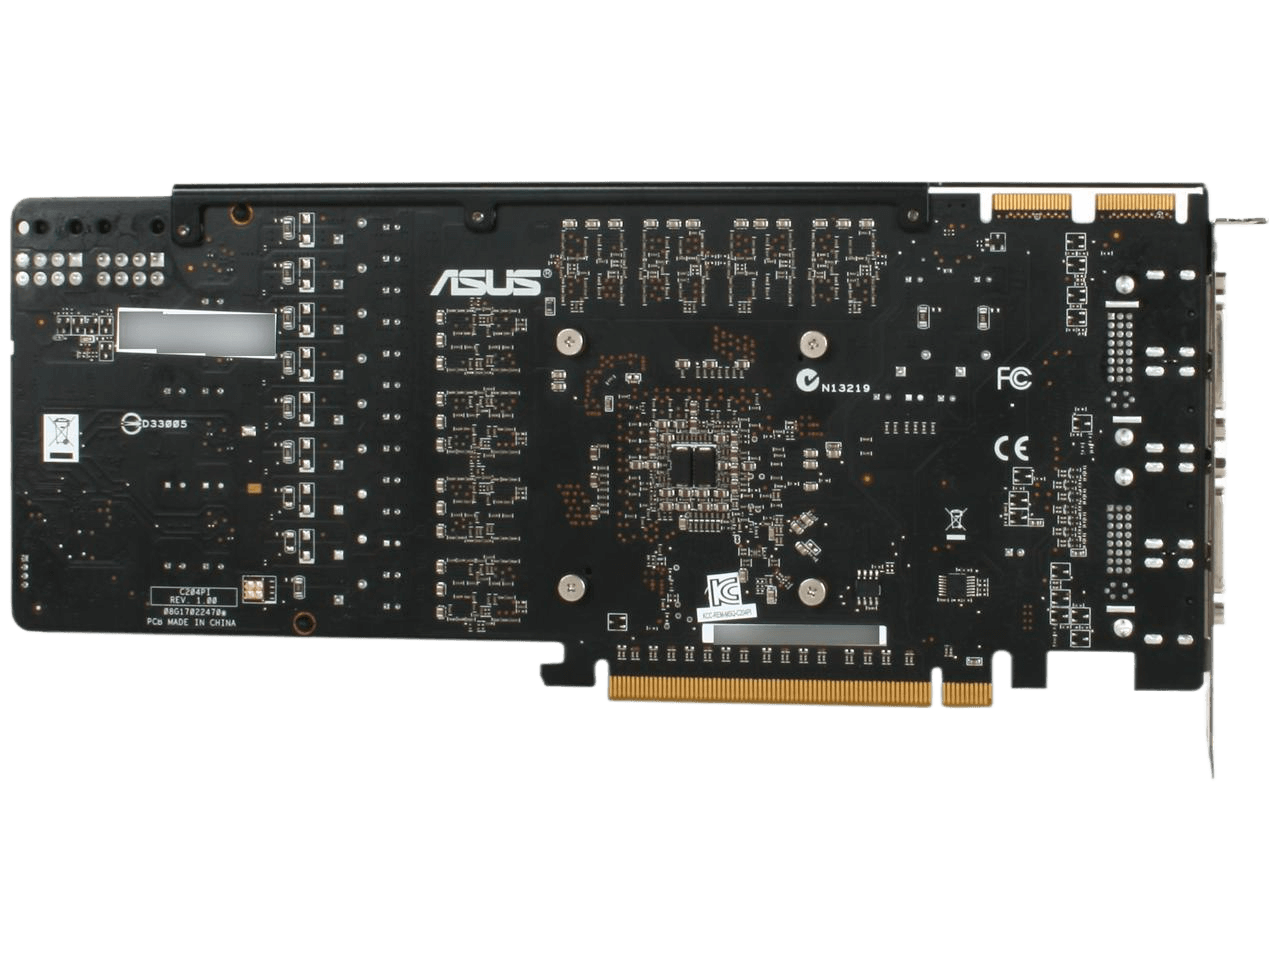 ASUS Radeon HD 6950 1GB GDDR5 PCI Express 2.1 x16 CrossFireX Support Video Card with Eyefinity EAH6950 DCII/2DI4S/1GD5